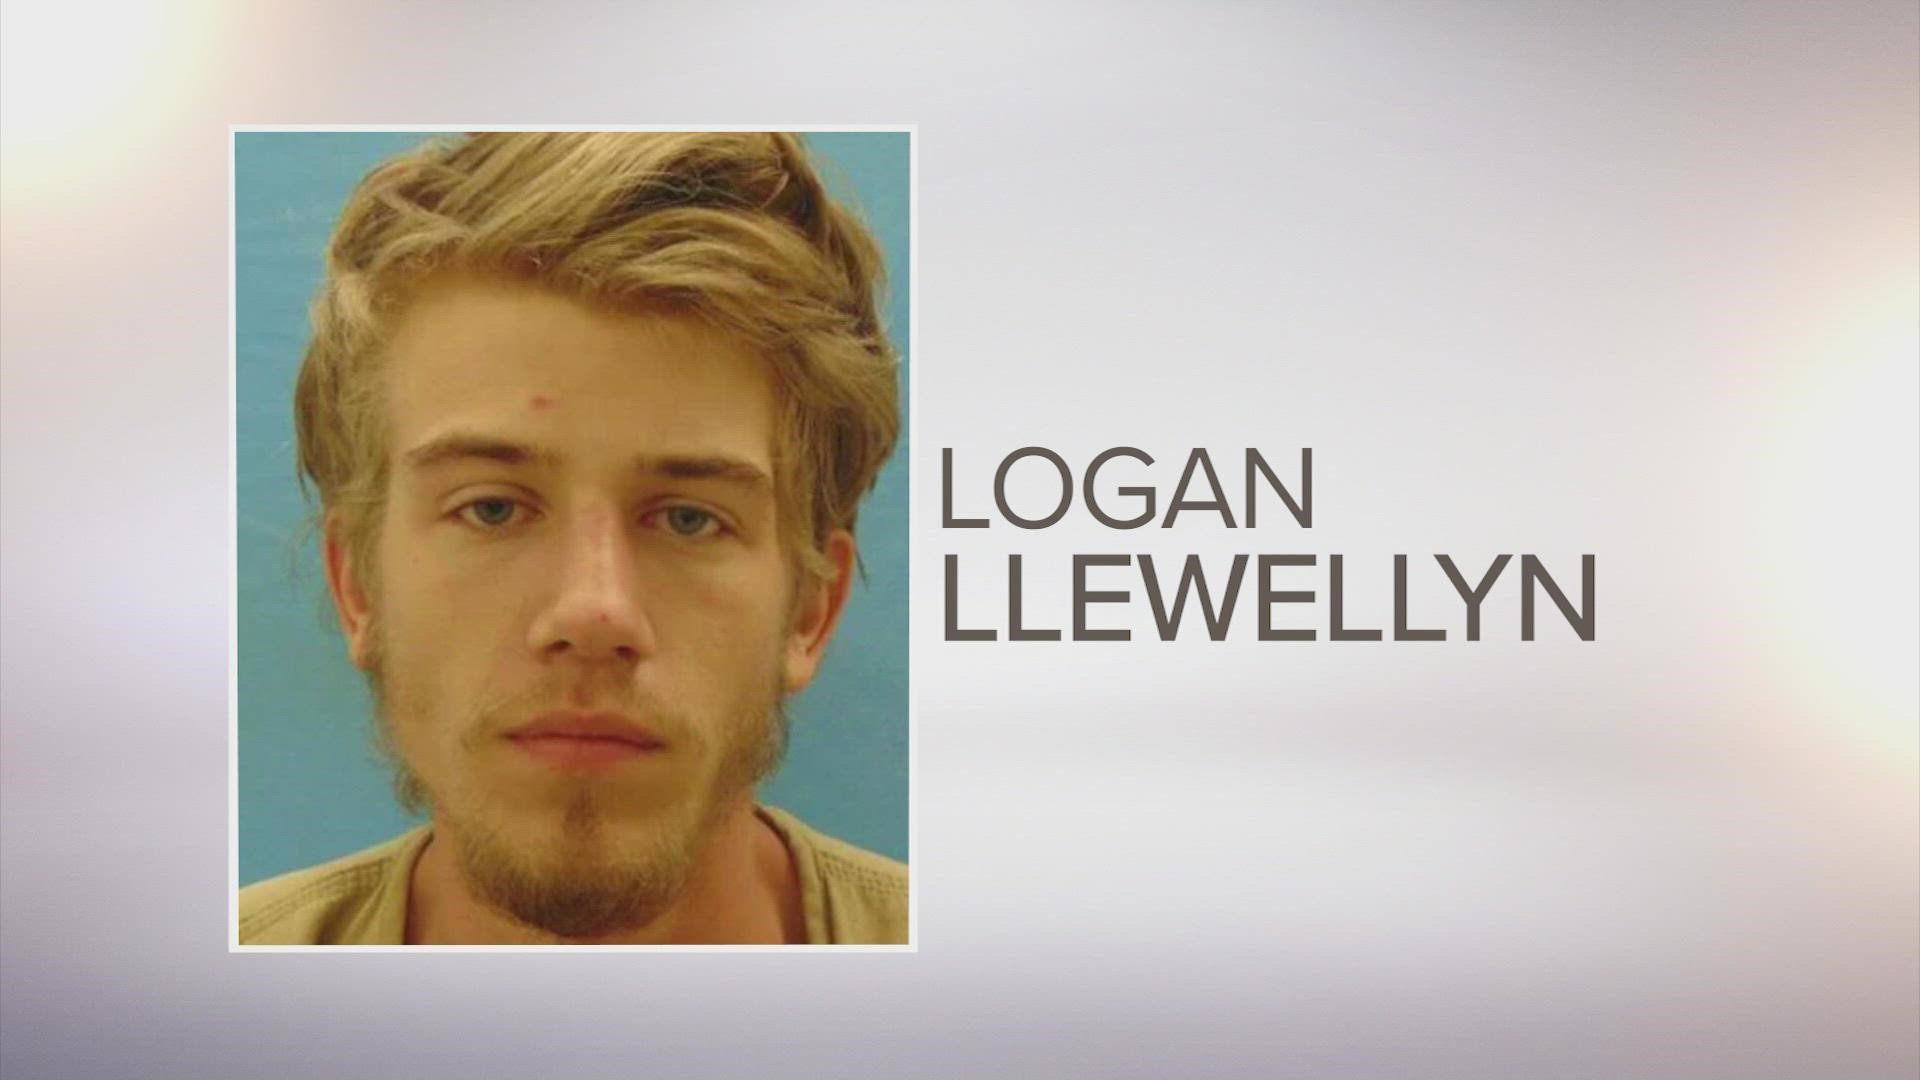 Logan Llewellyn, 21, was arrested in Seguin in connection with the death of Dr. Nancy Hughes. He's been charged with an accident involving death.